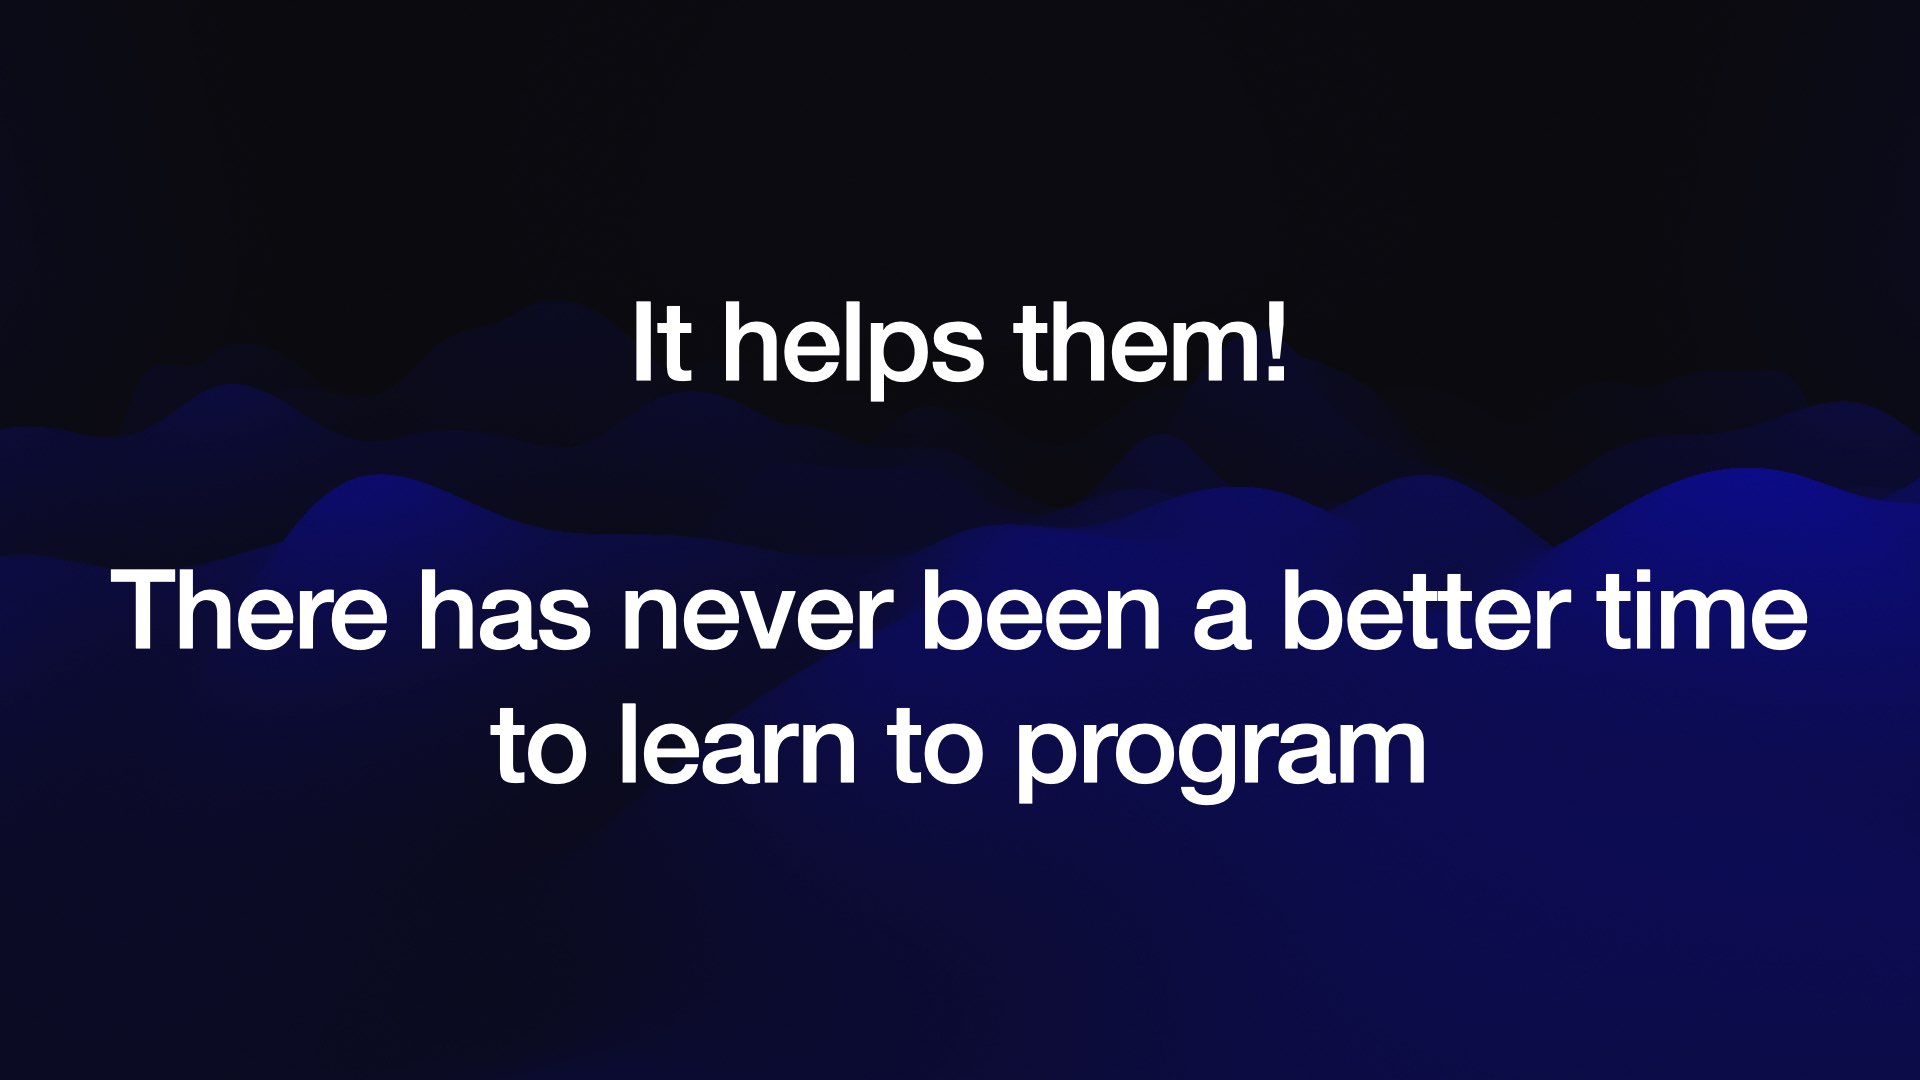 It helps them!  There has never been a better time to learn to program